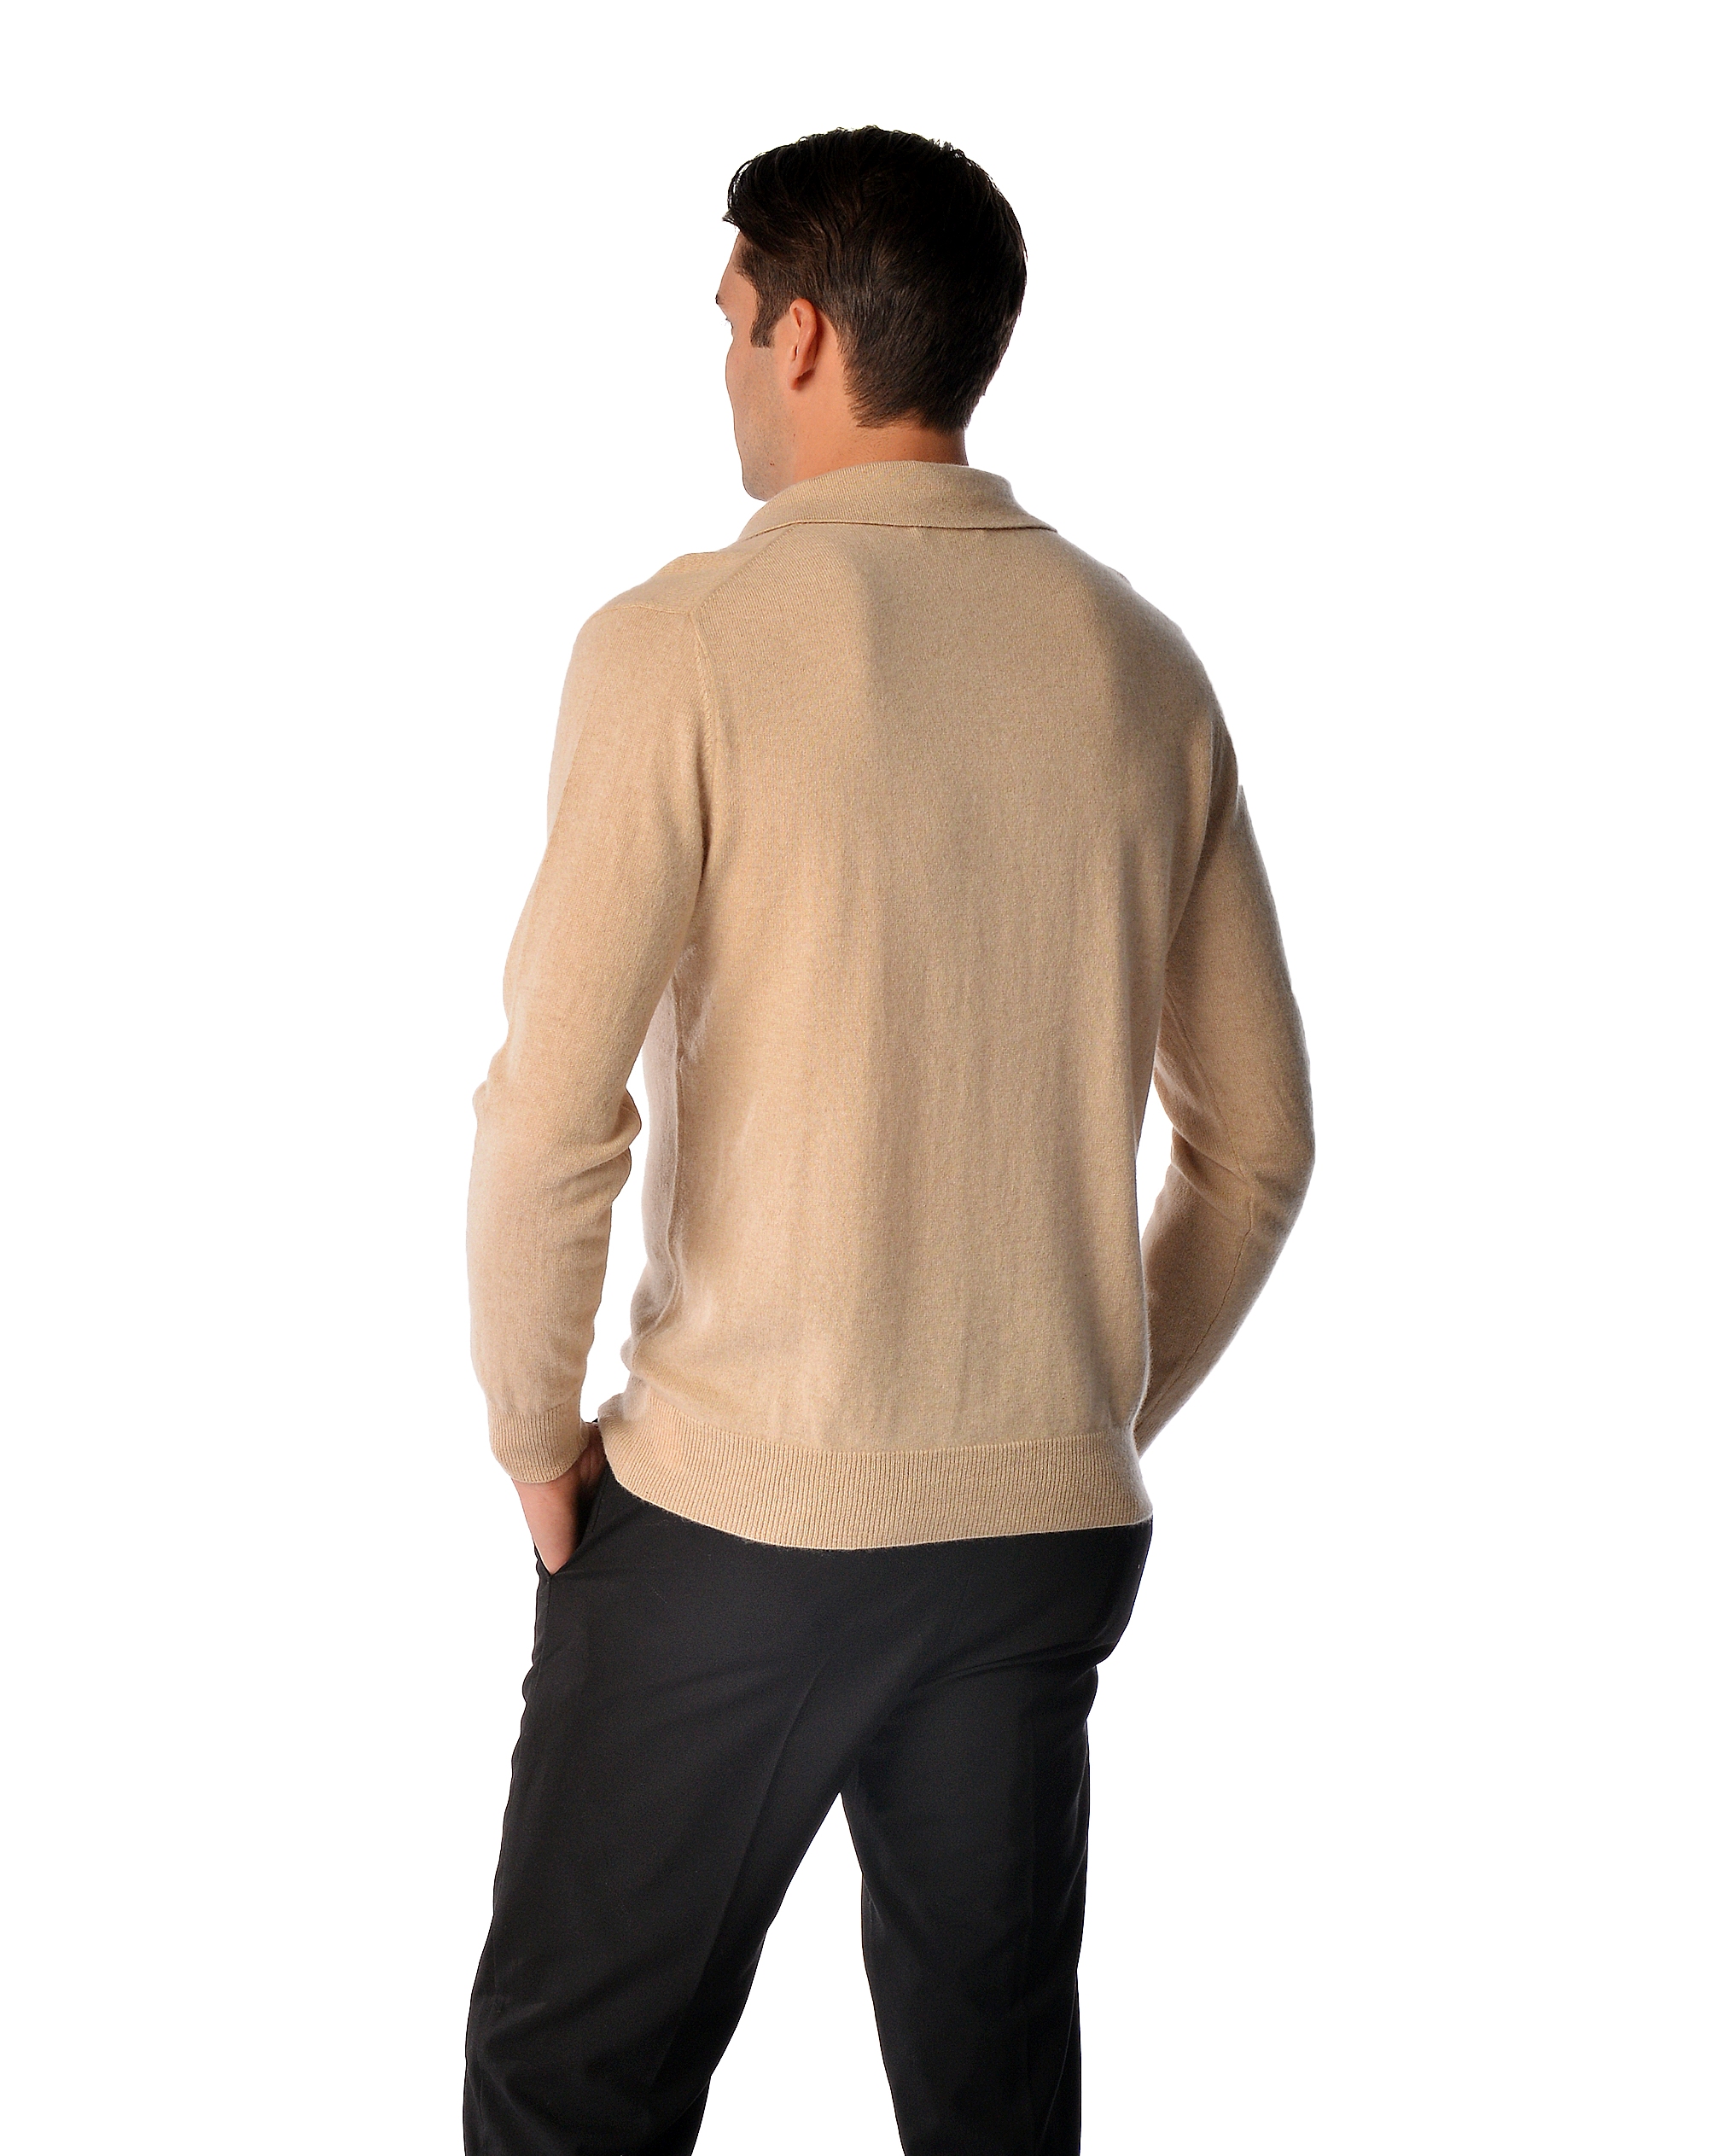 Men\'s Pure Cashmere Polo Sweater (Camel, Extra Large)